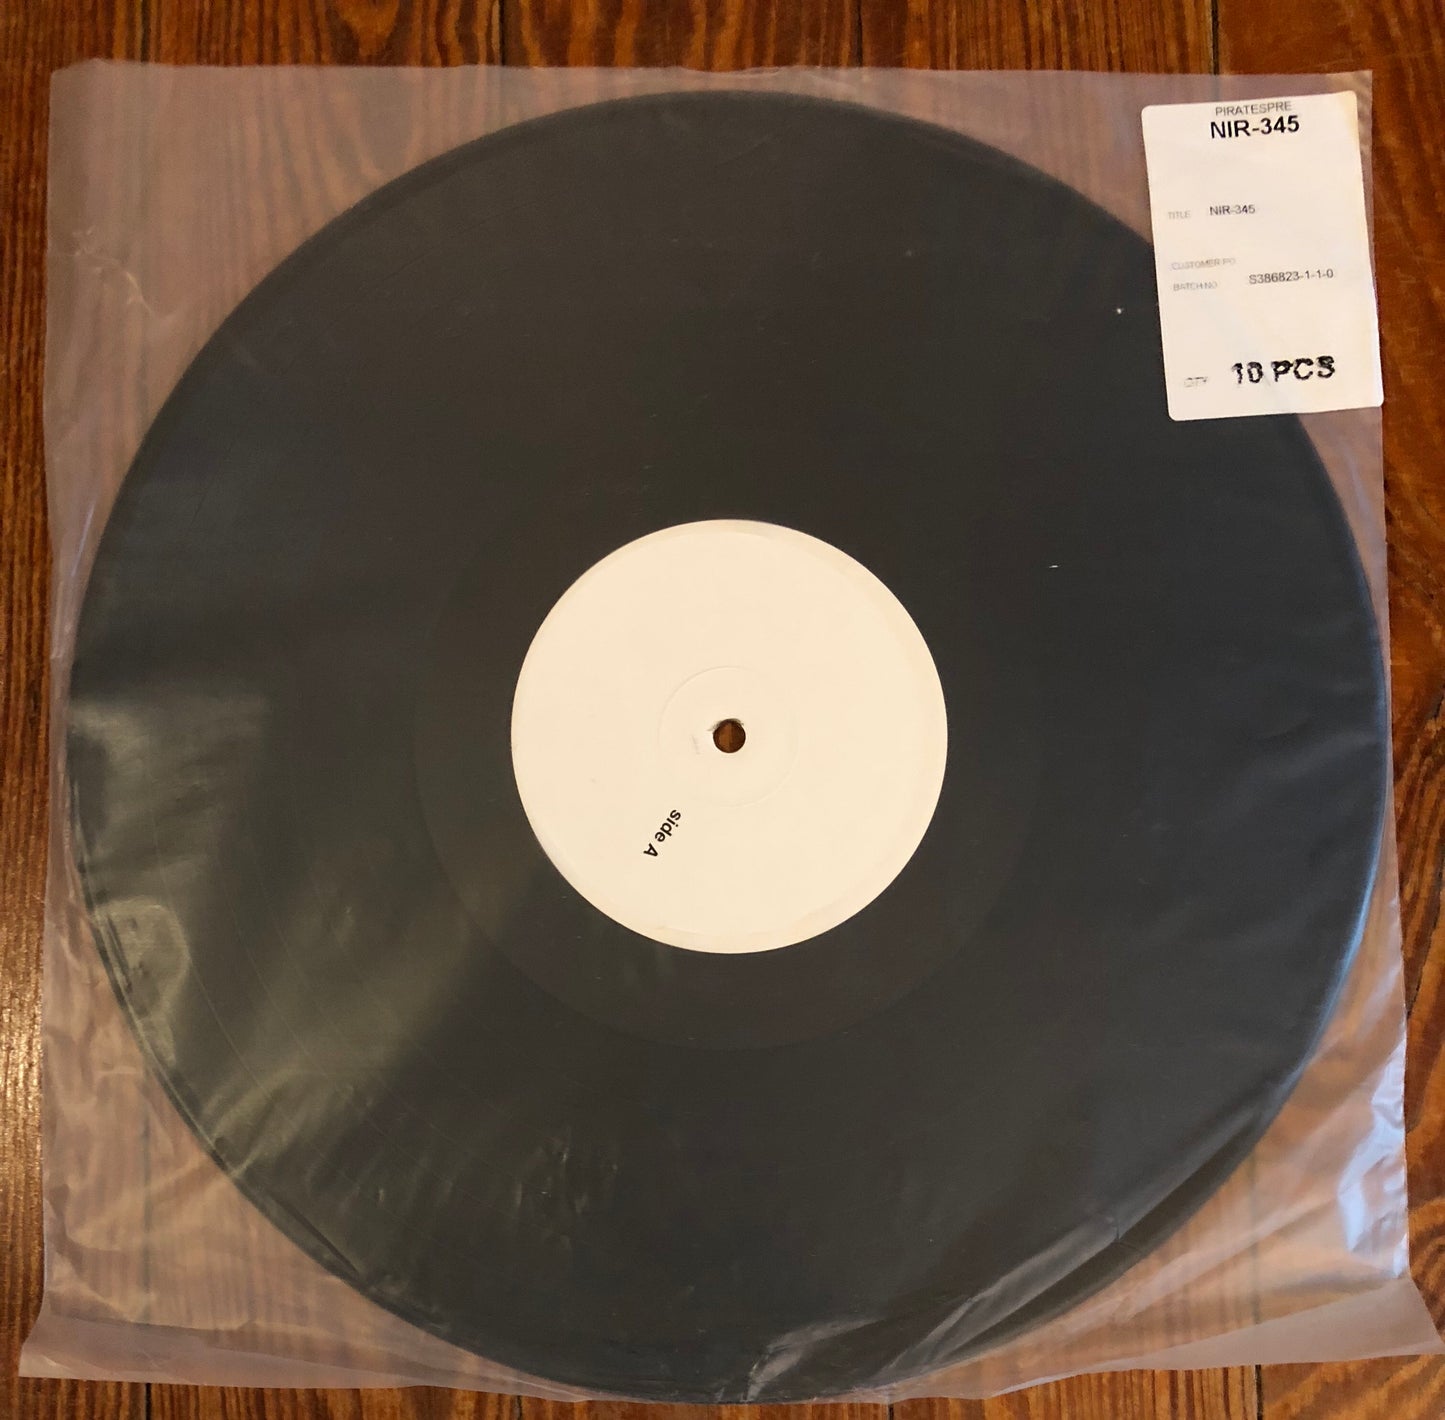 SUNSHINE STATE "Pour" TEST PRESSING